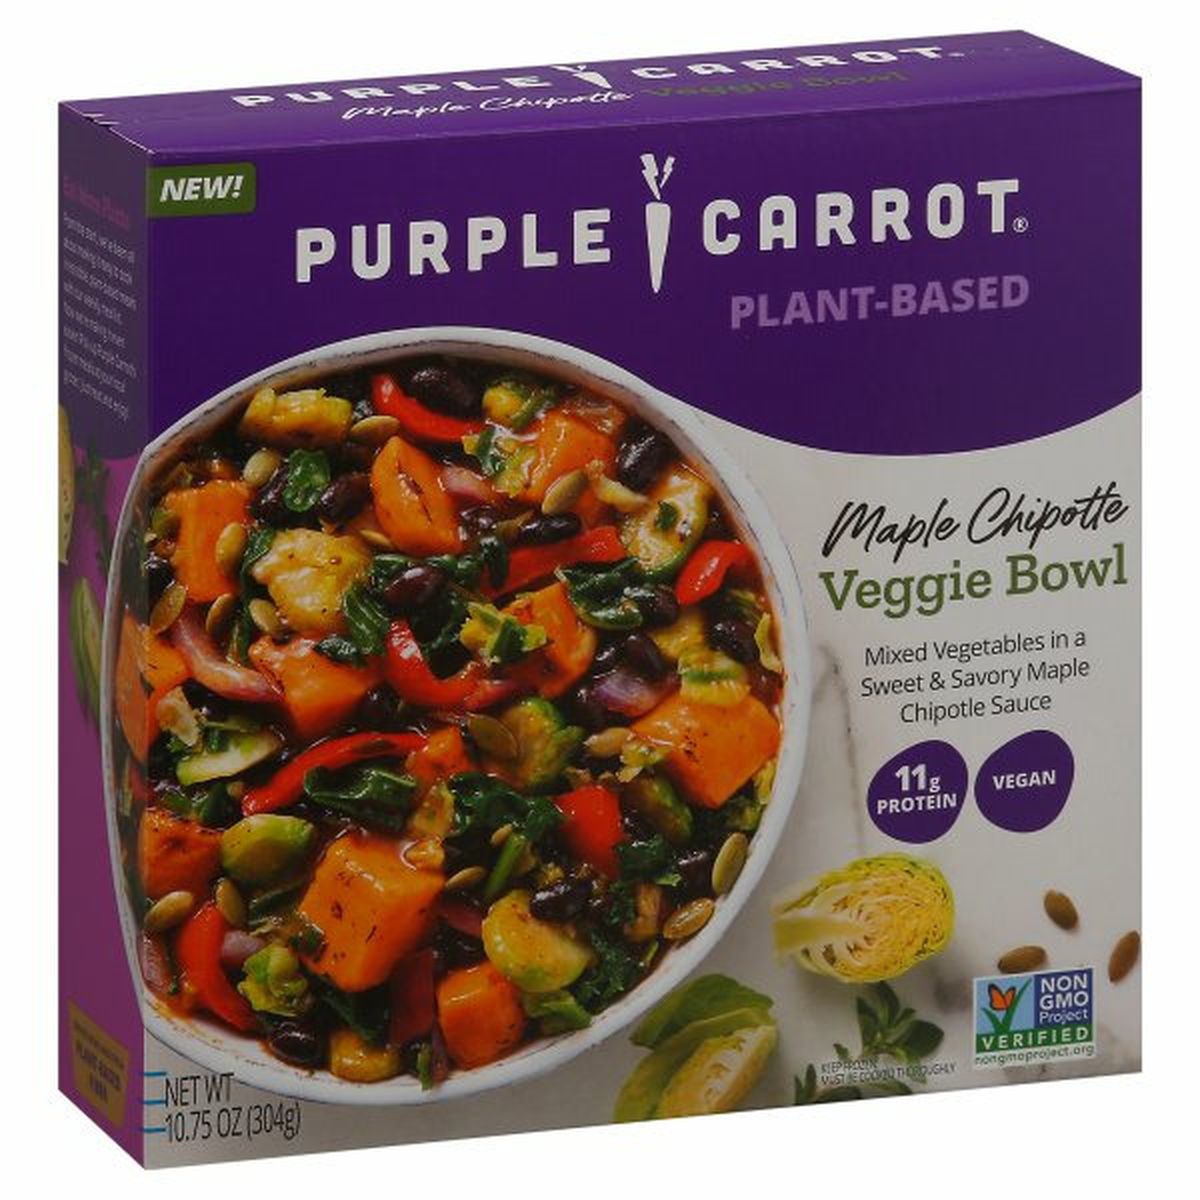 Calories in 0i Veggie Bowl, Maple Chipotle, Plant-Based